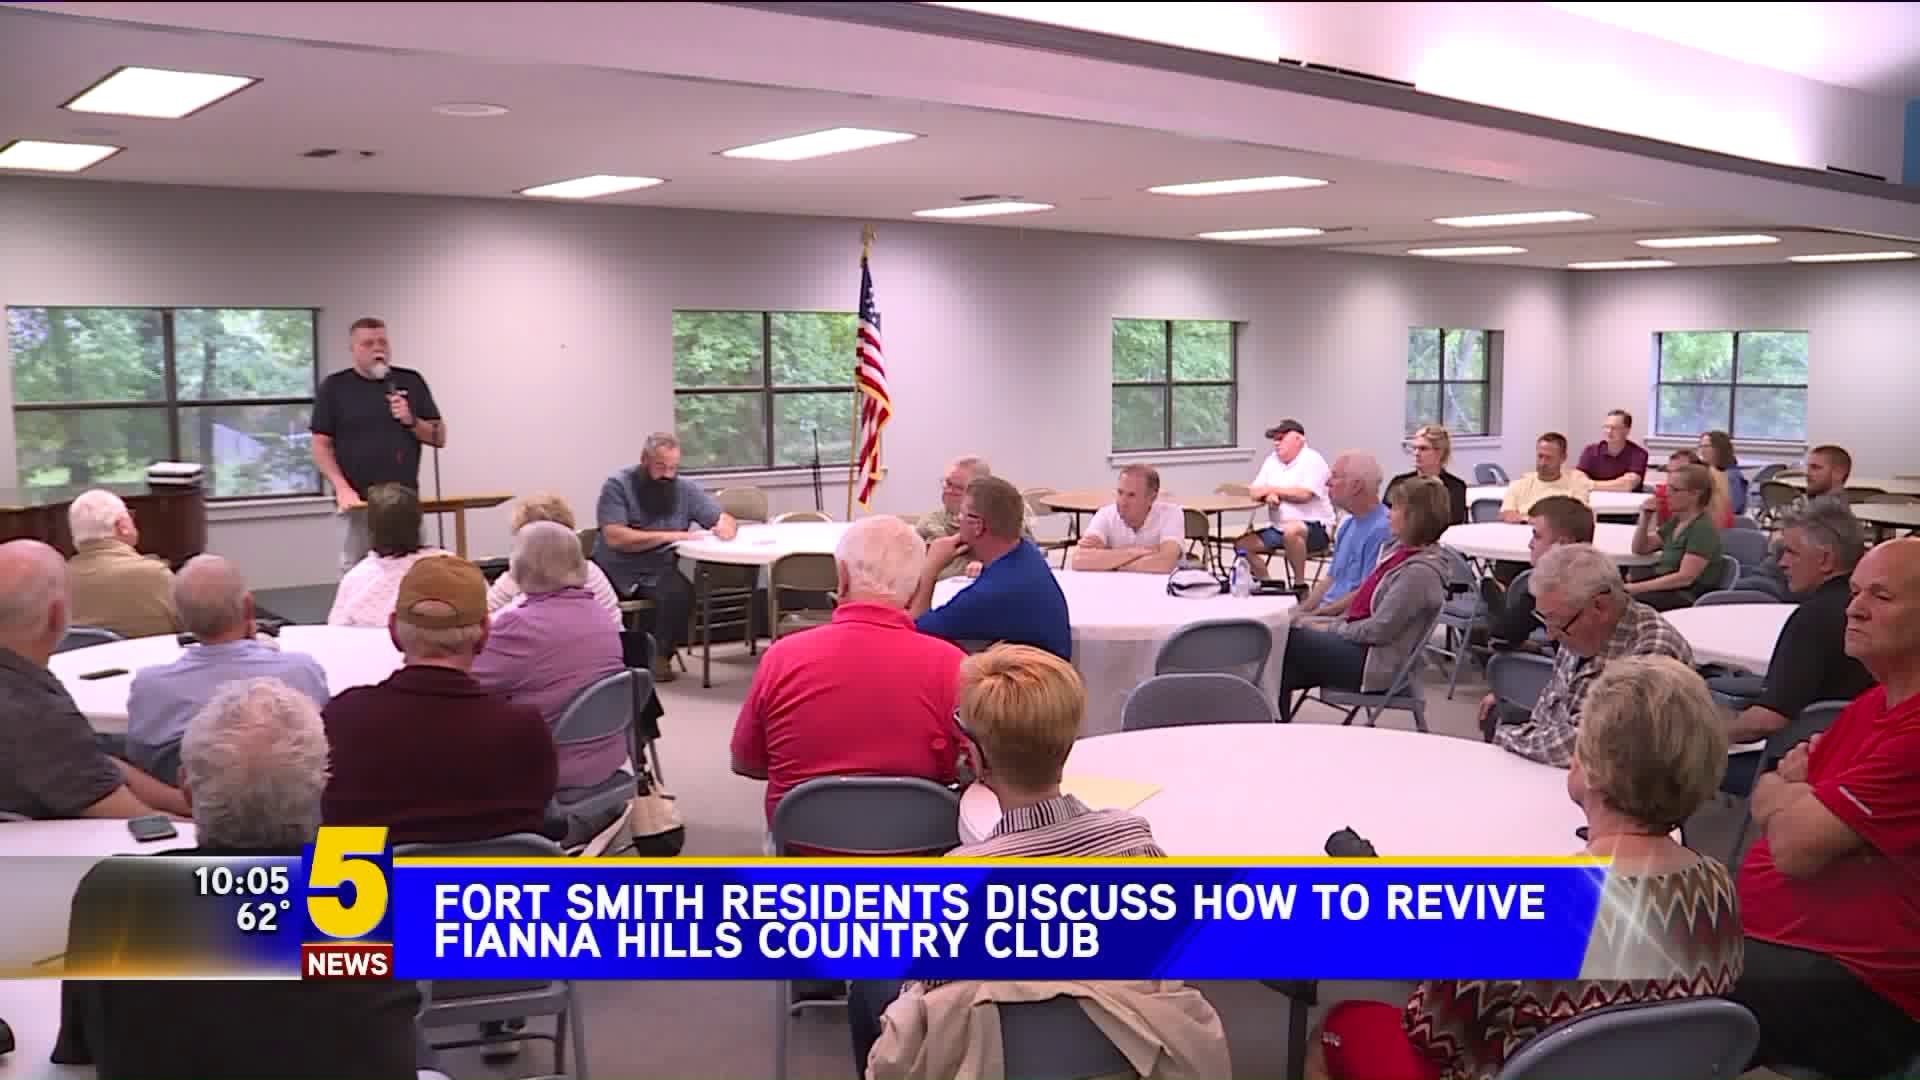 Fort Smith Residents Discuss Riviving Fianna Hills Country Club